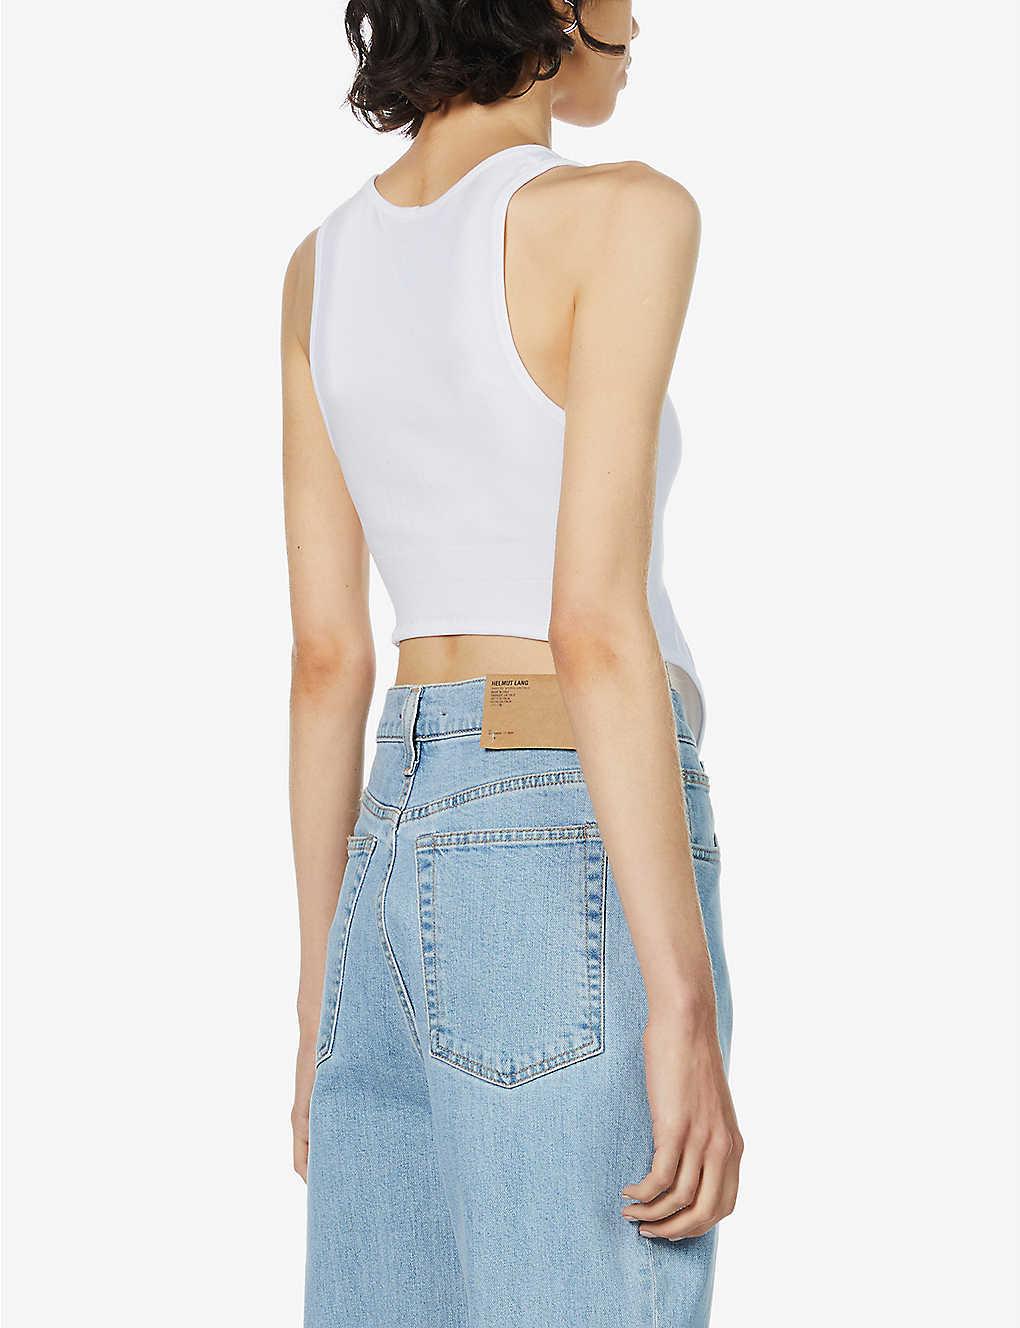 Helmut Lang Womens Optic White Cropped Stretch-woven Top M/l | Lyst